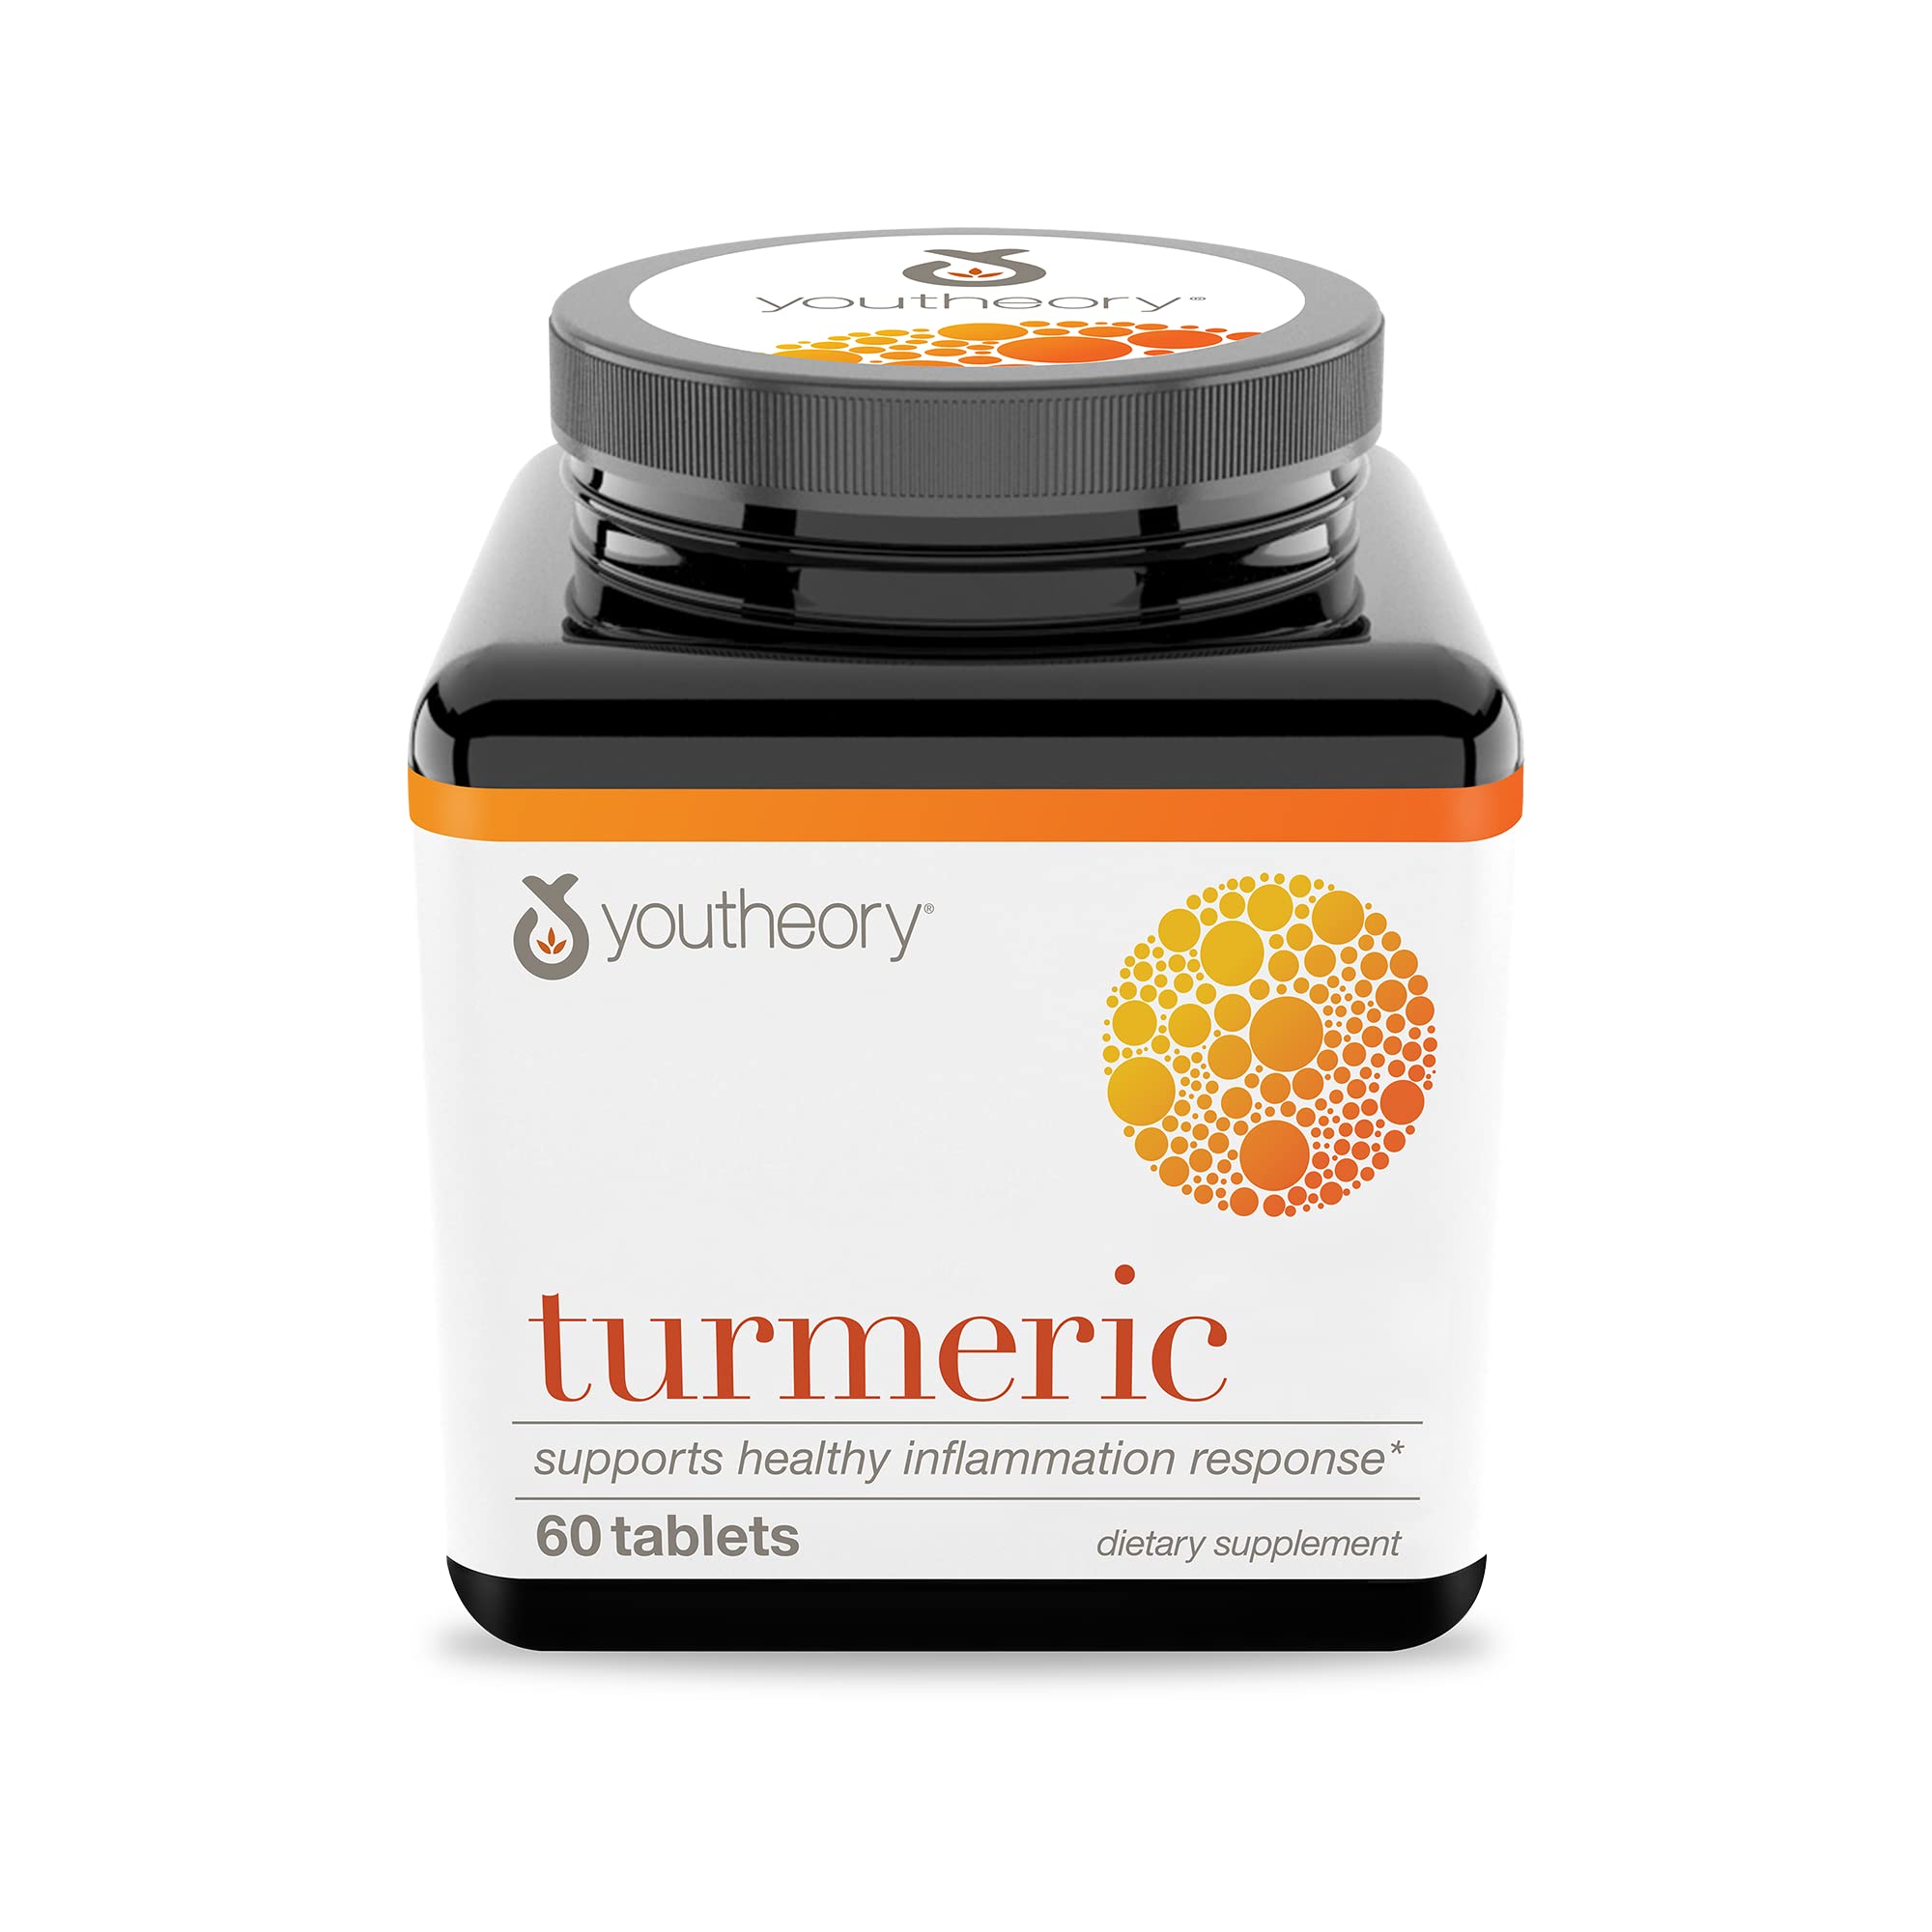 Youtheory Turmeric Curcumin Supplement with Black Pepper BioPerine, Powerful Antioxidant Properties for Joint & Healthy Inflammation Support, 60 Tablets